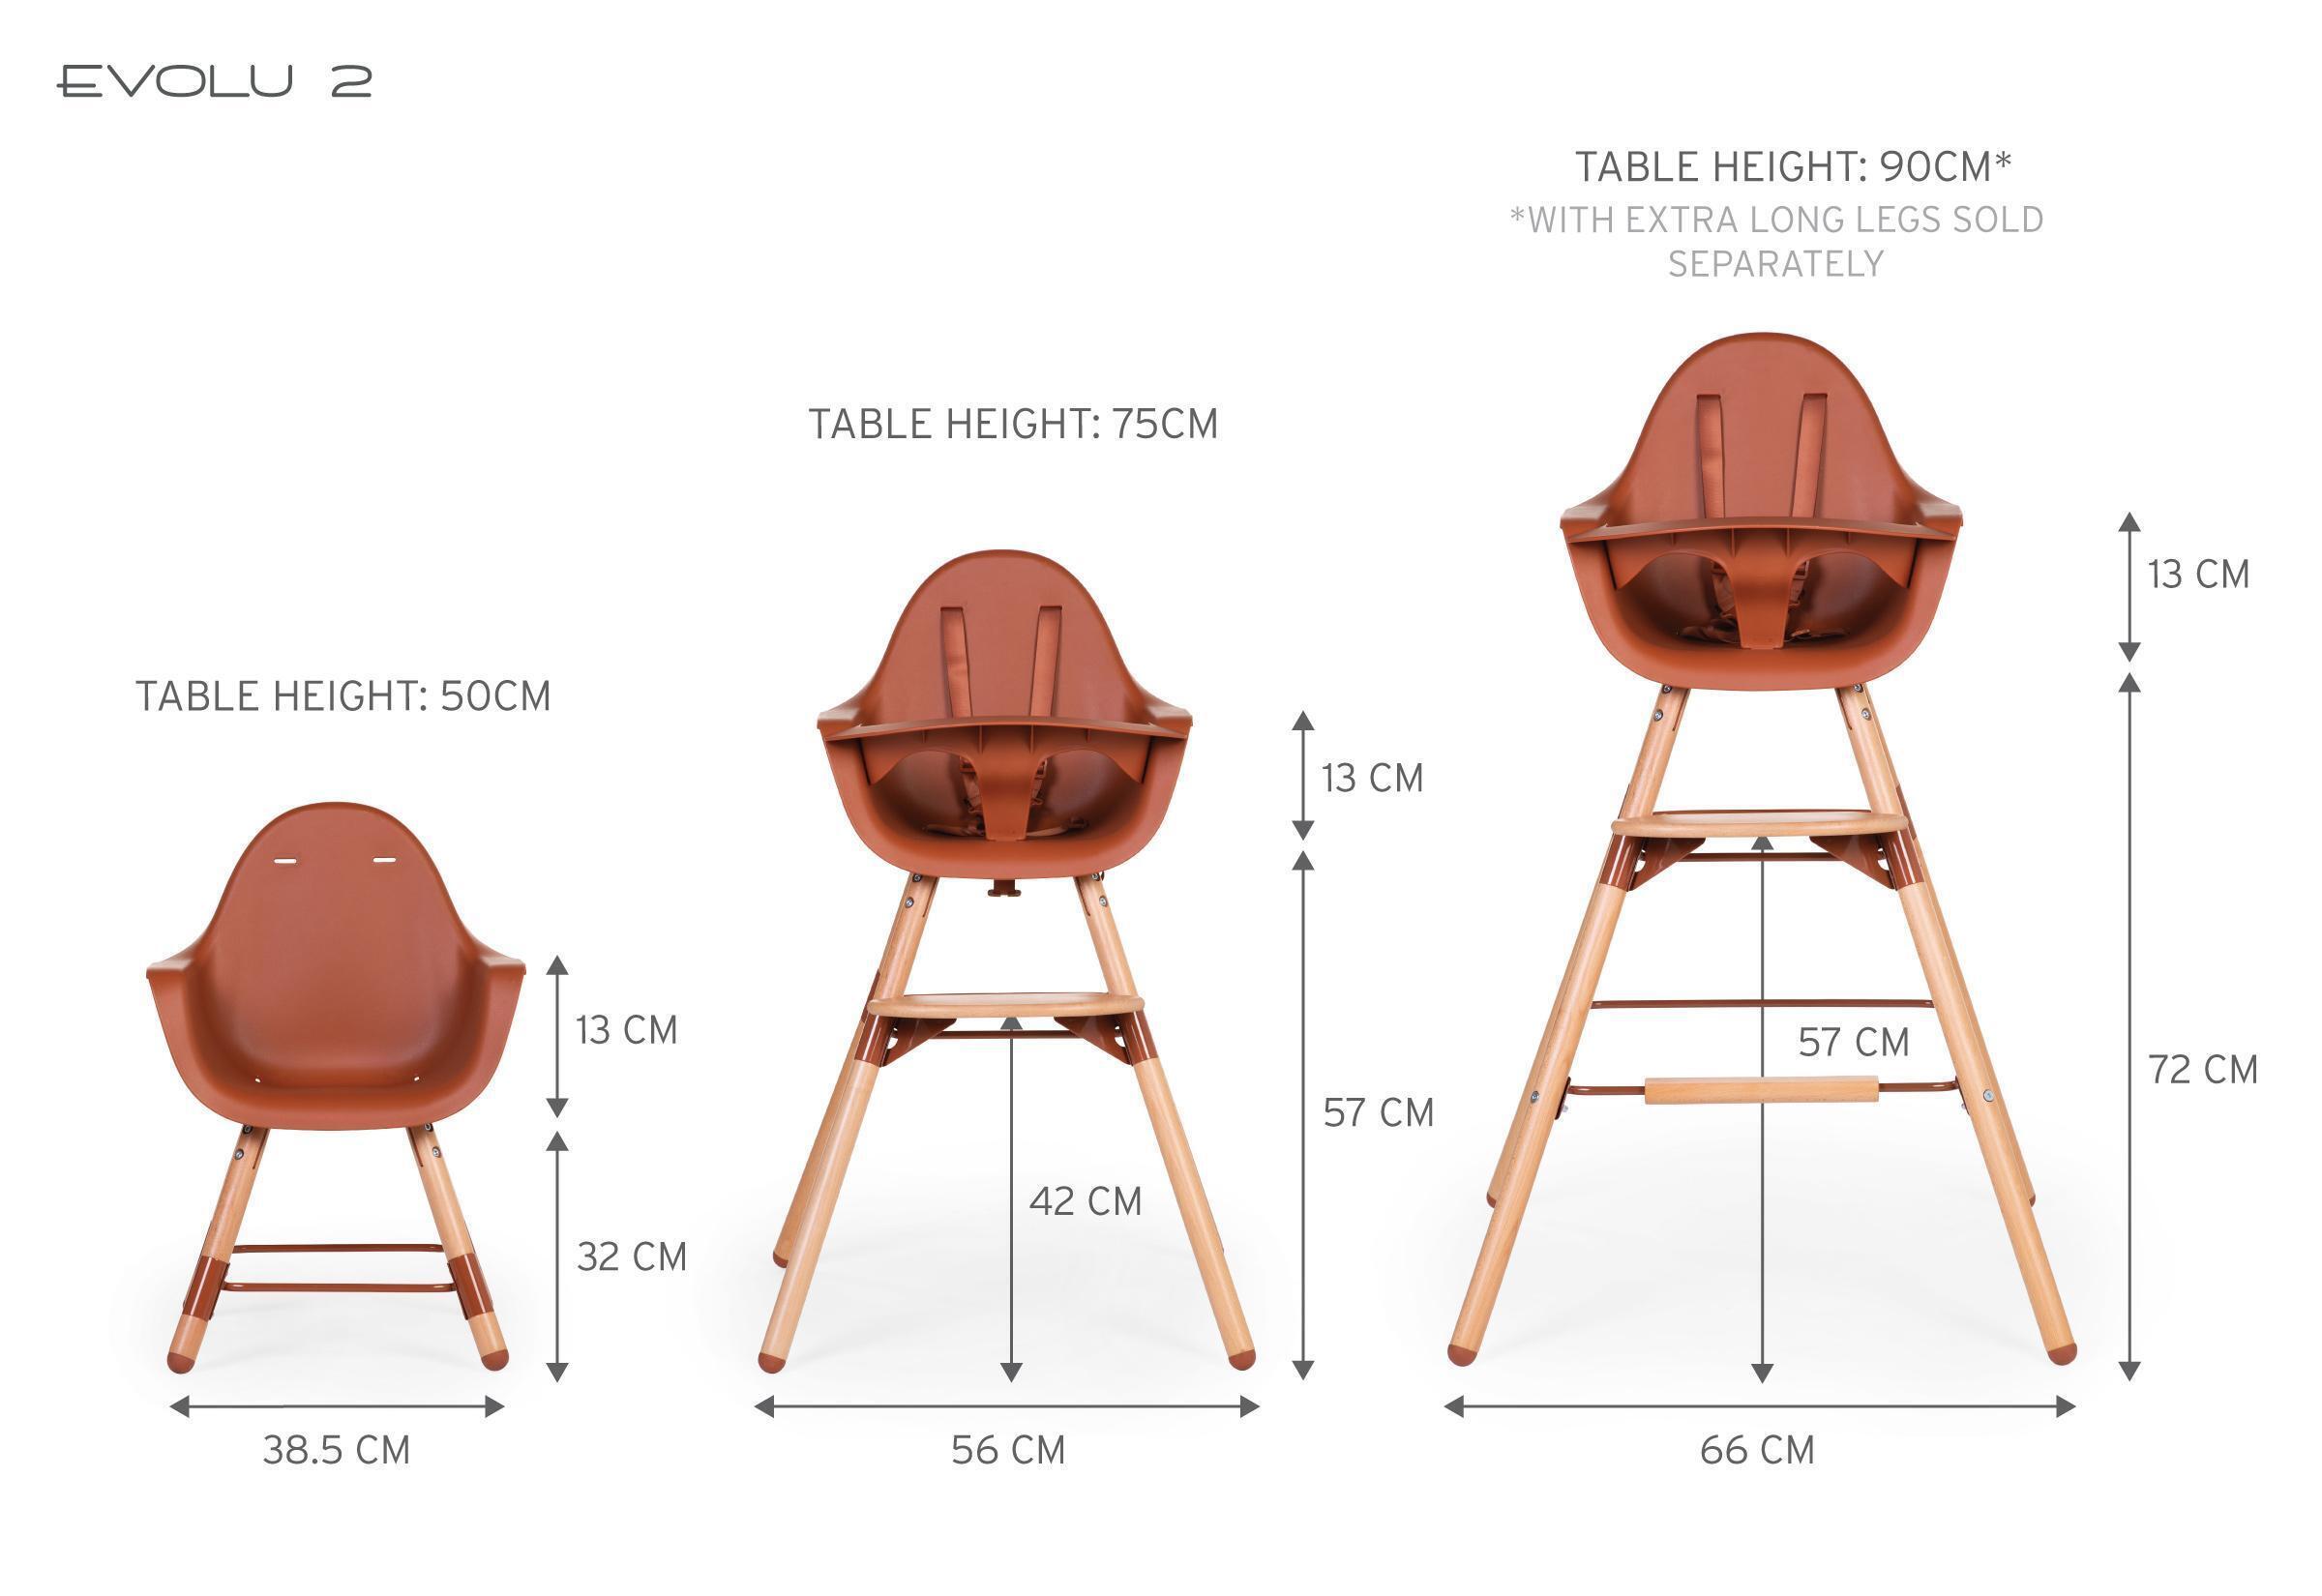 https://www.nordbaby.com/products/images/g120000/125262/eating-chairs-childhome-rust-childhome-evolu-2-high-chair-2in1-with-bumper-natural-rust-125262-71107.jpg